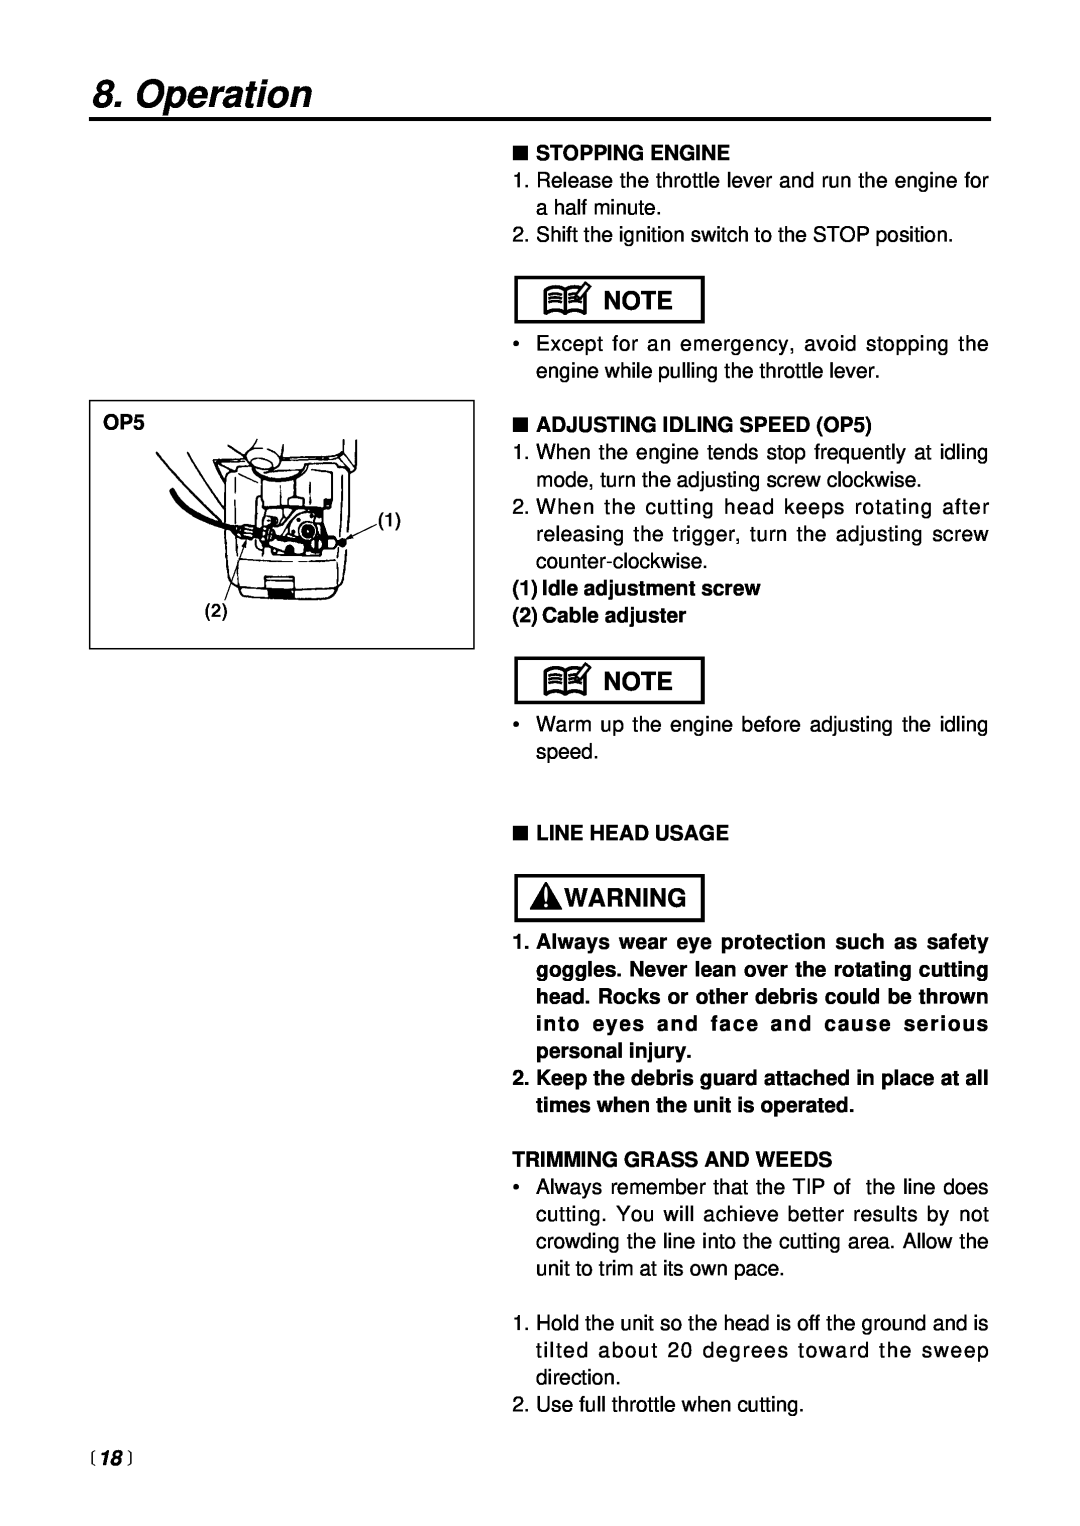 RedMax BC225DL manual 18 , Operation, Stopping Engine 